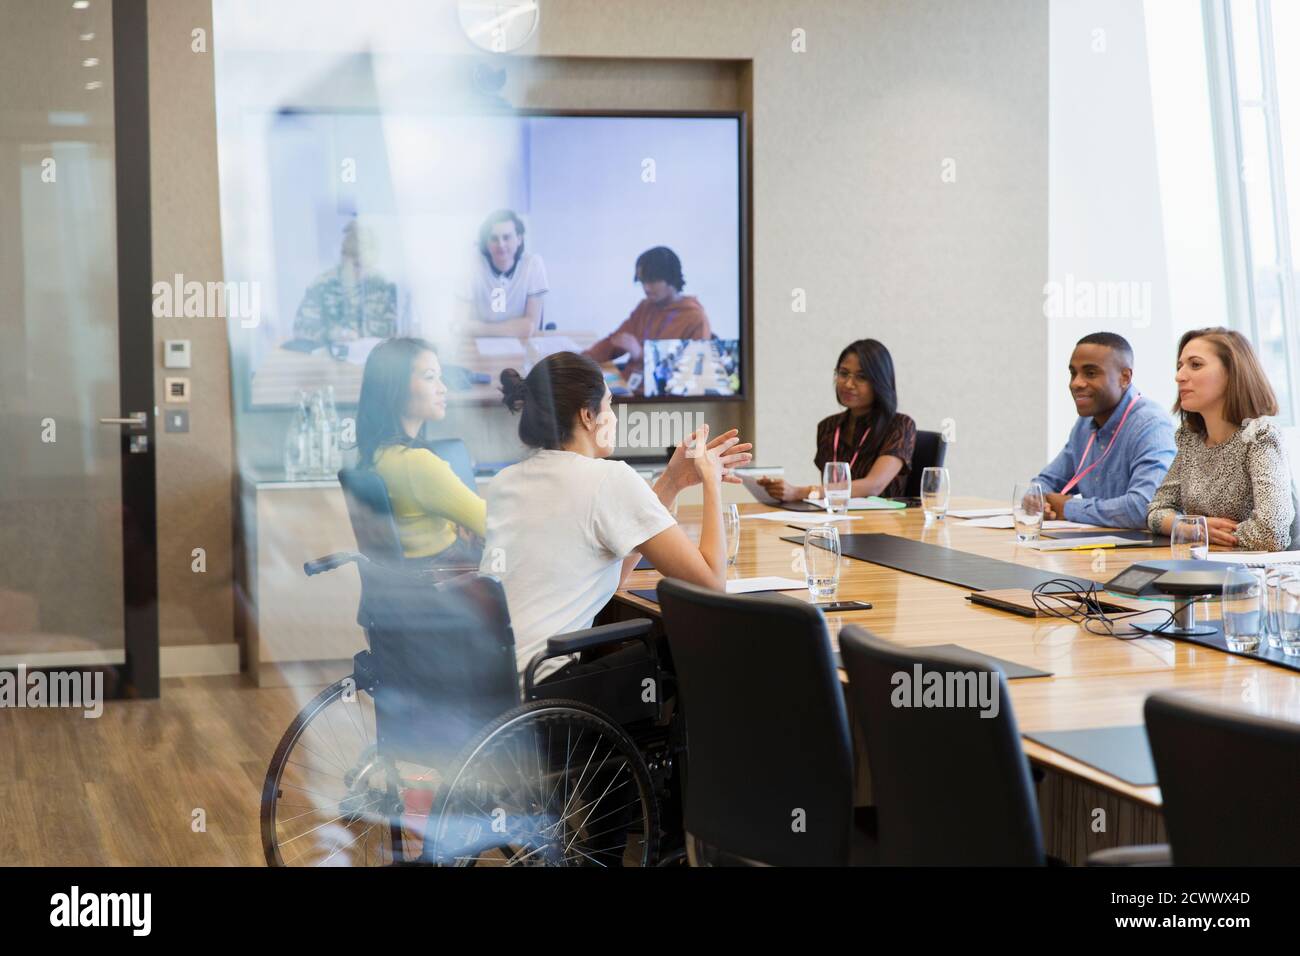 Business people talking and video conferencing in conference room Stock Photo